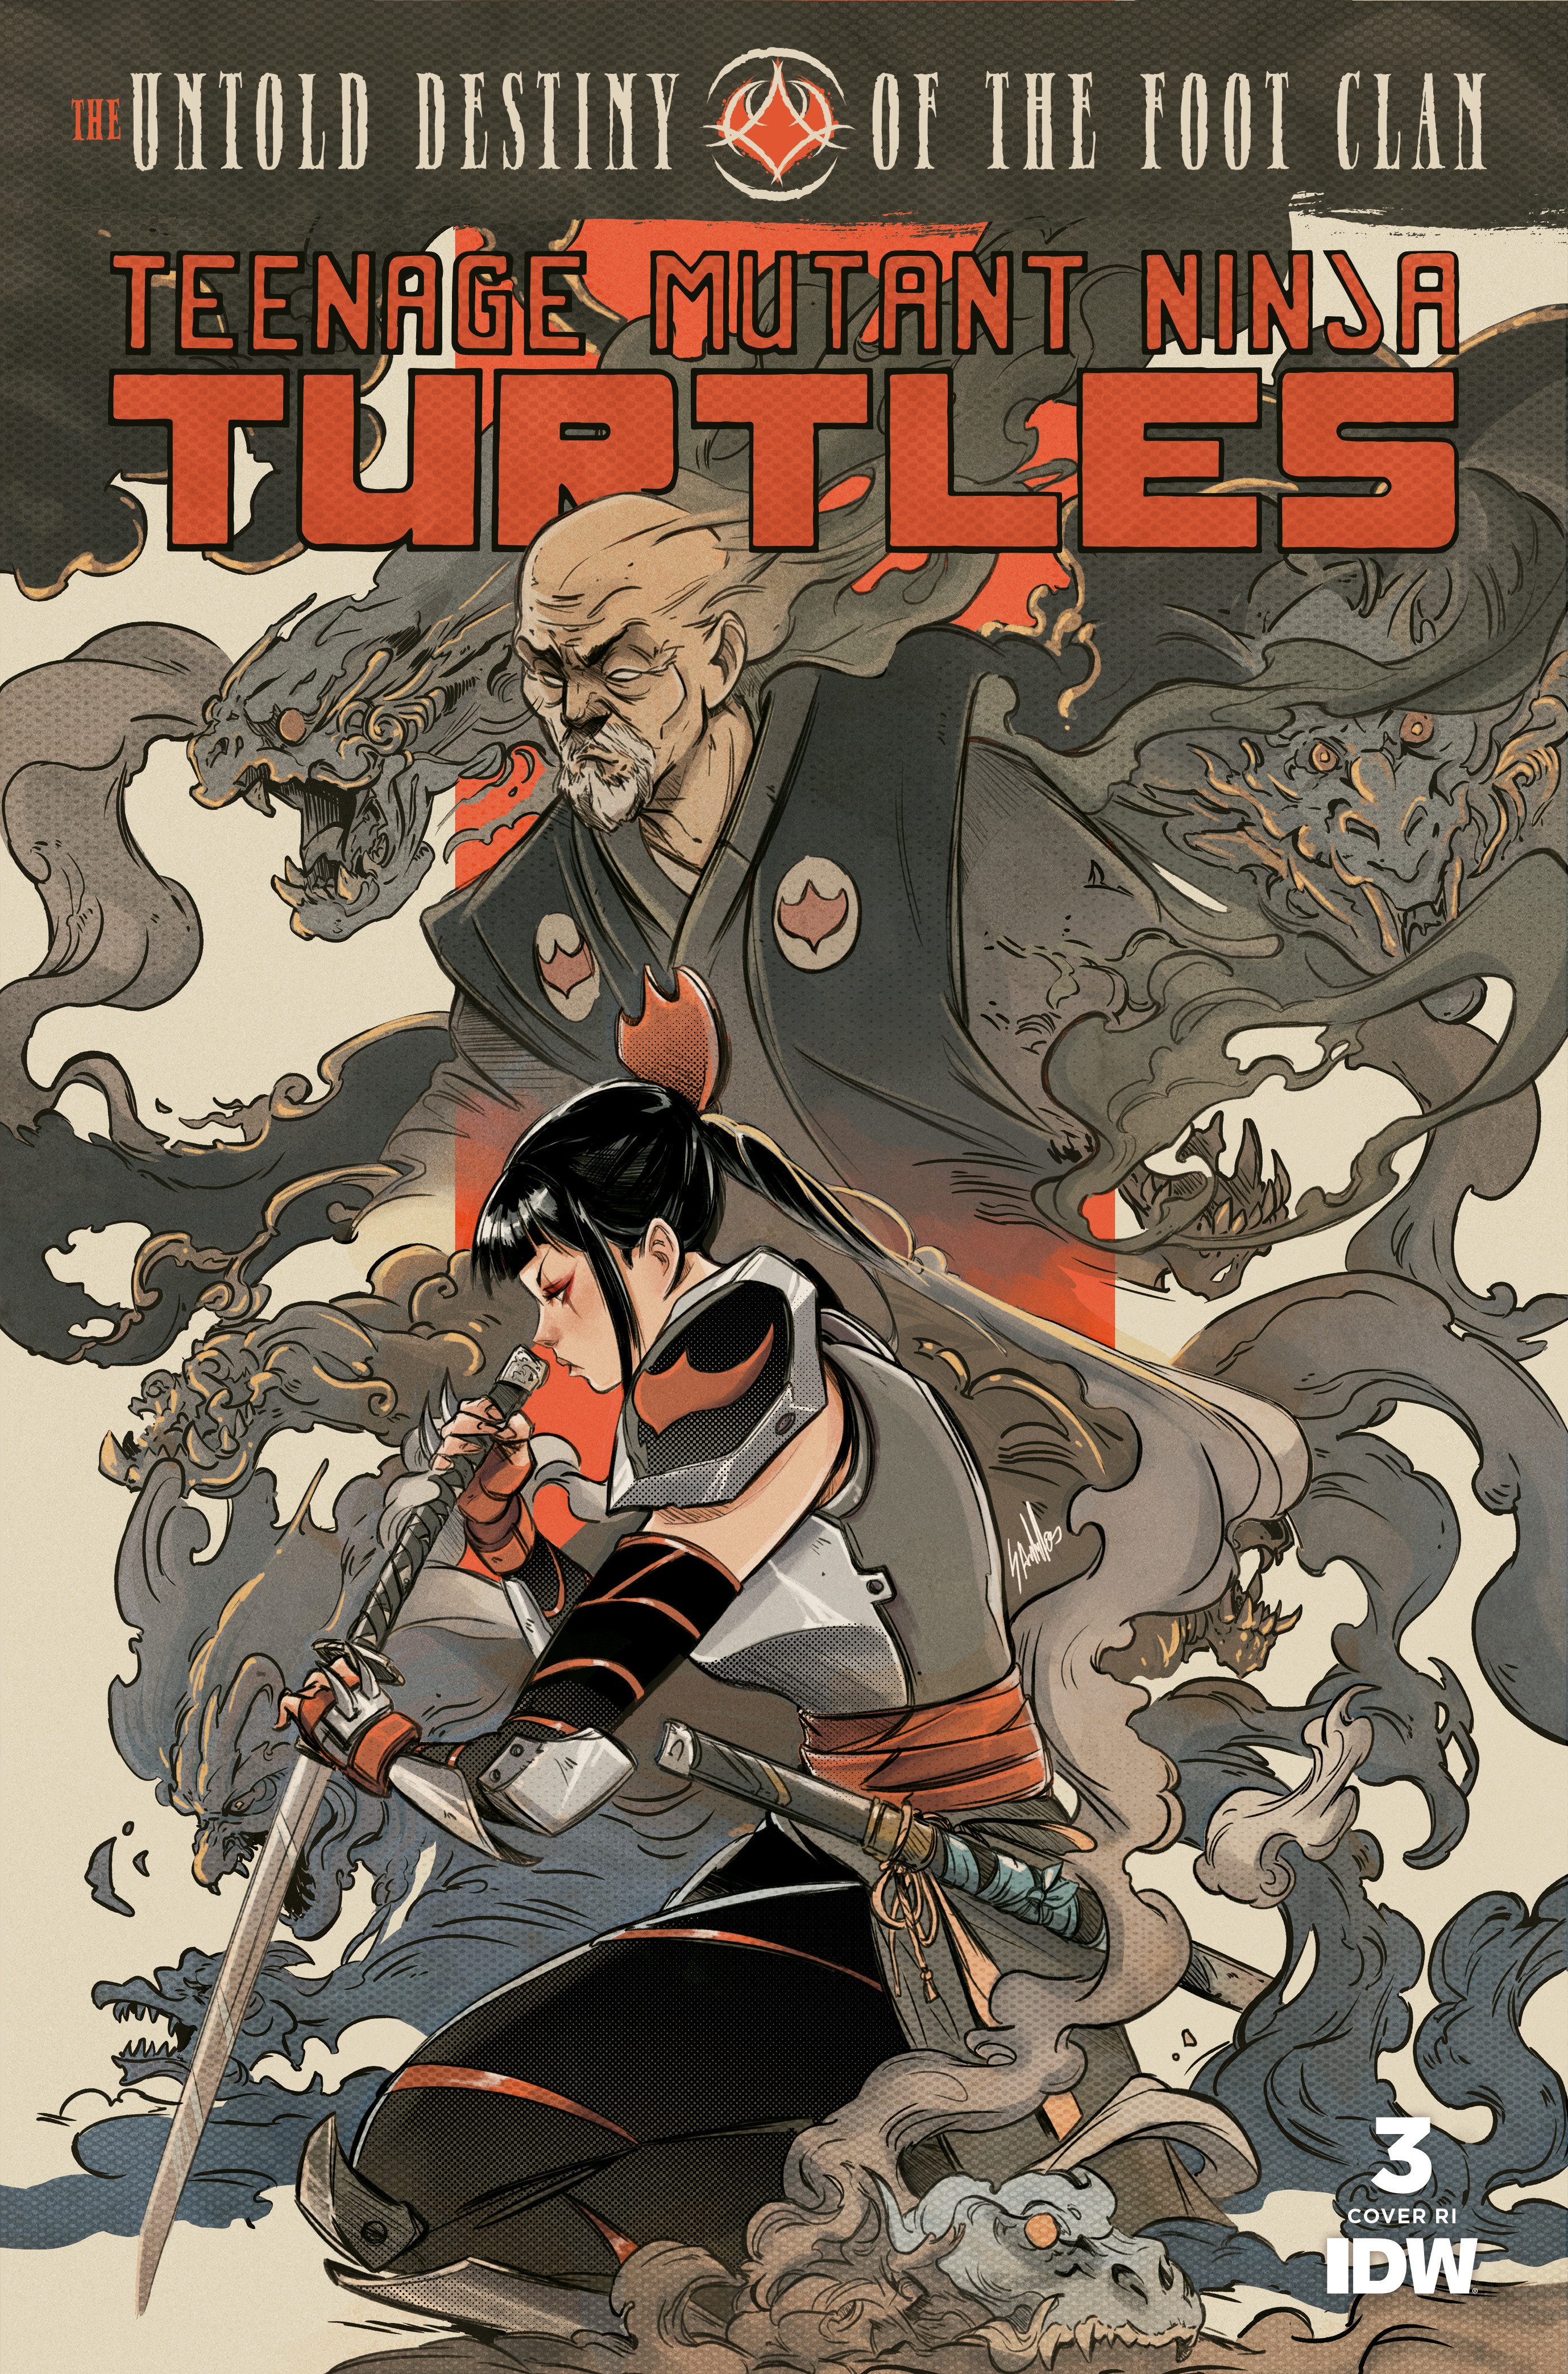 Teenage Mutant Ninja Turtles: The Untold Destiny of the Foot Clan #3 Santtos 1 for 10 Incentive Variant